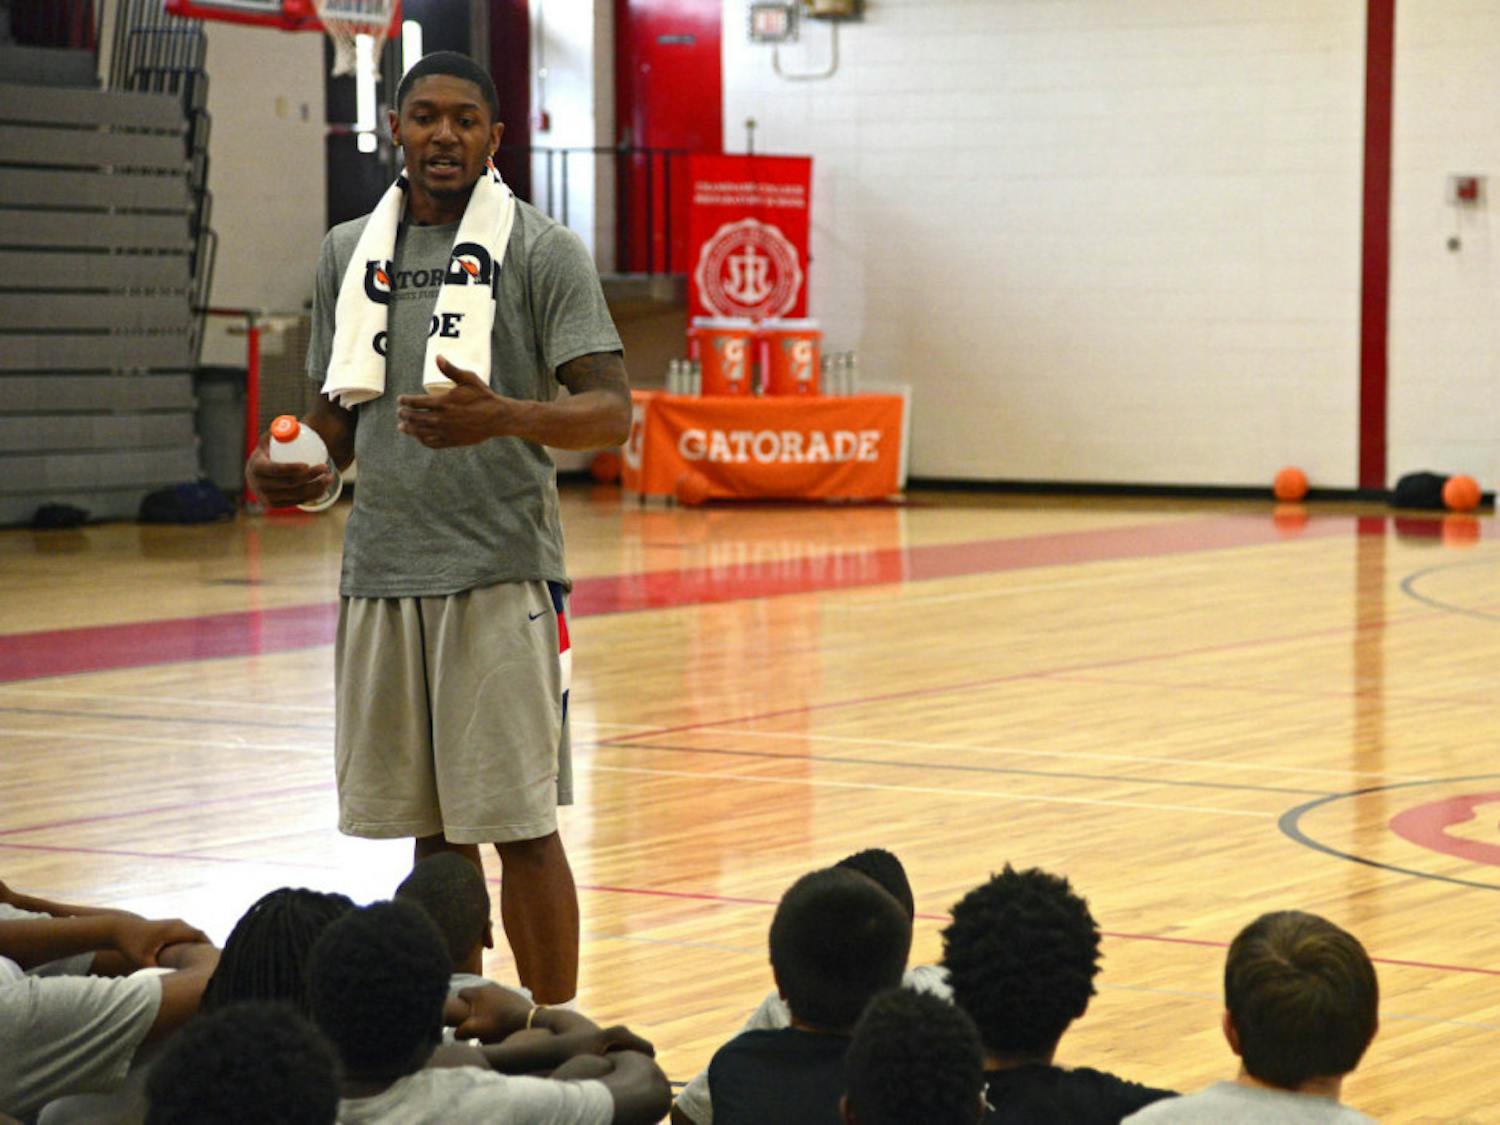 Washington Wizard's guard Bradley Beal delivers a special presentation about heat safety and hydration to youth athletes on behalf of Gatorade's Beat the Heat program.&nbsp;